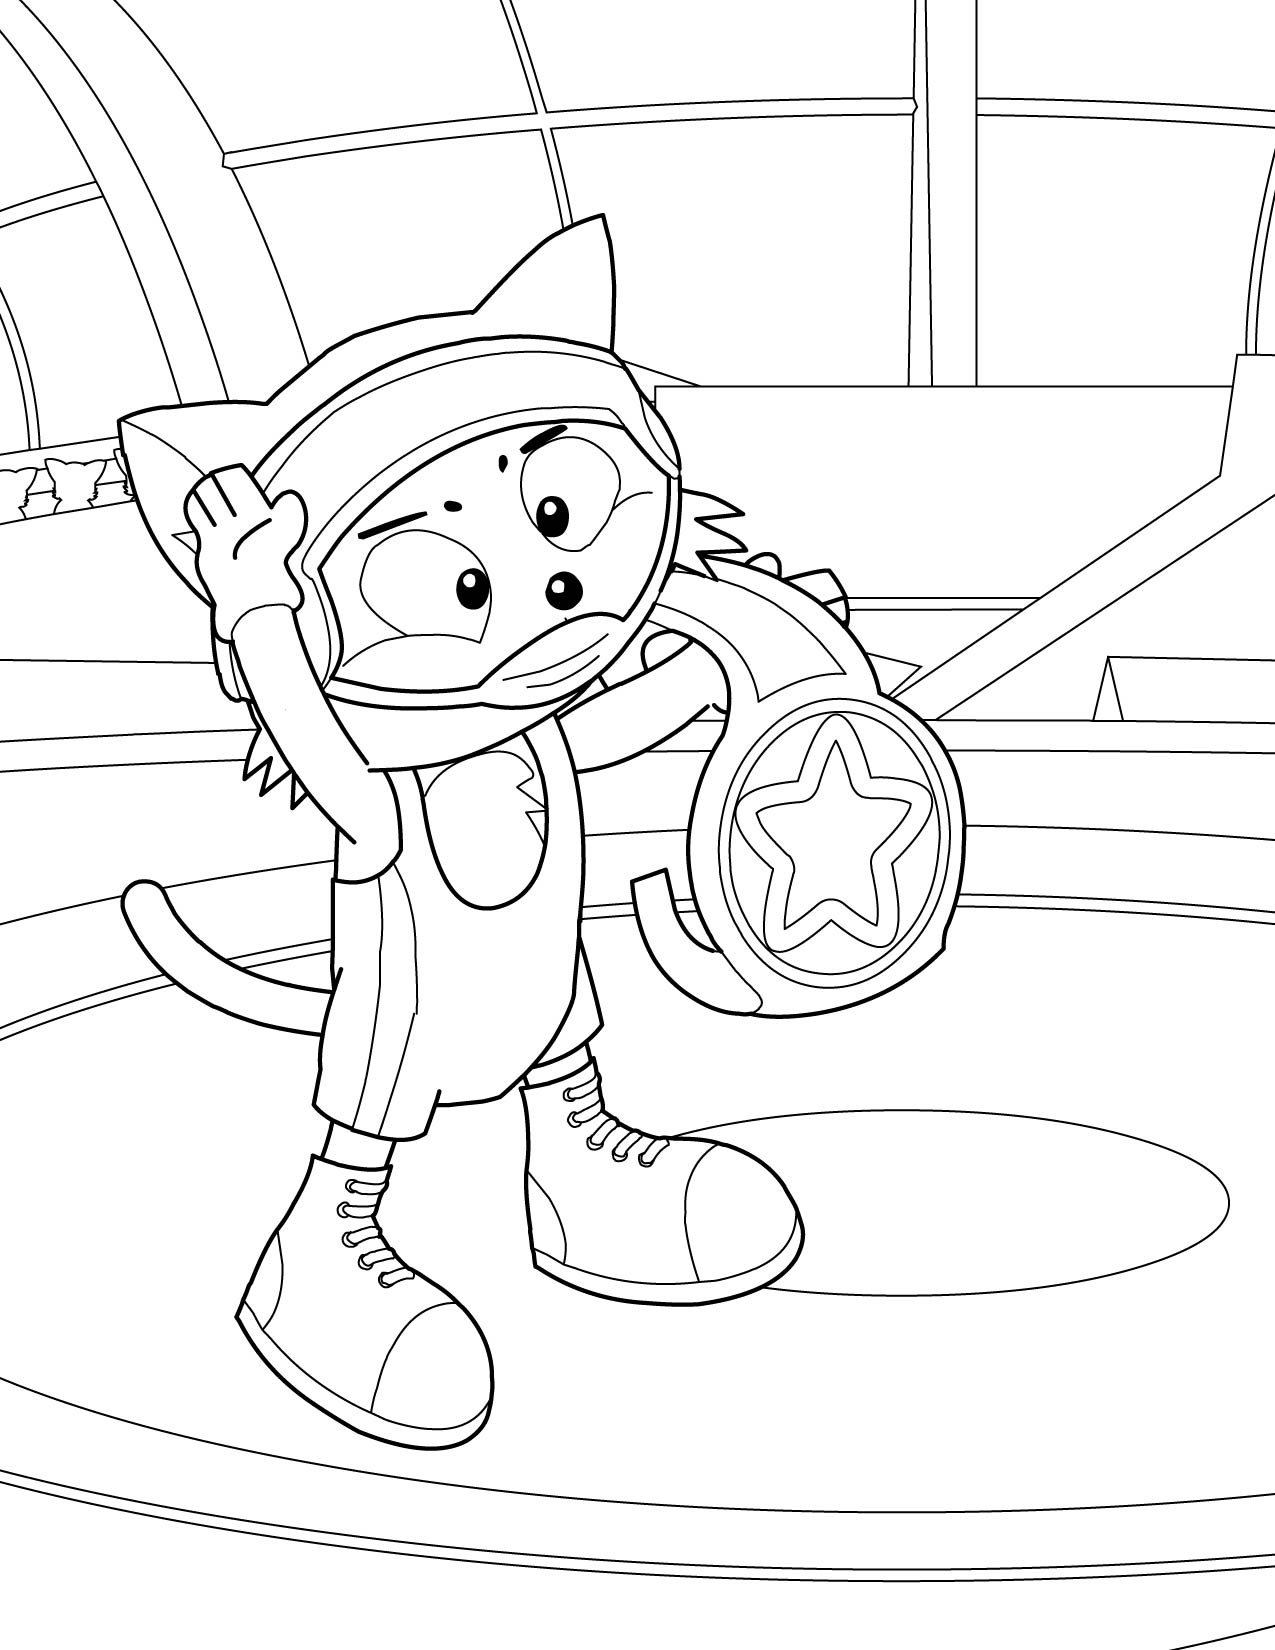 Printable Wwe Coloring Pages For Kids John Cena Pages adult